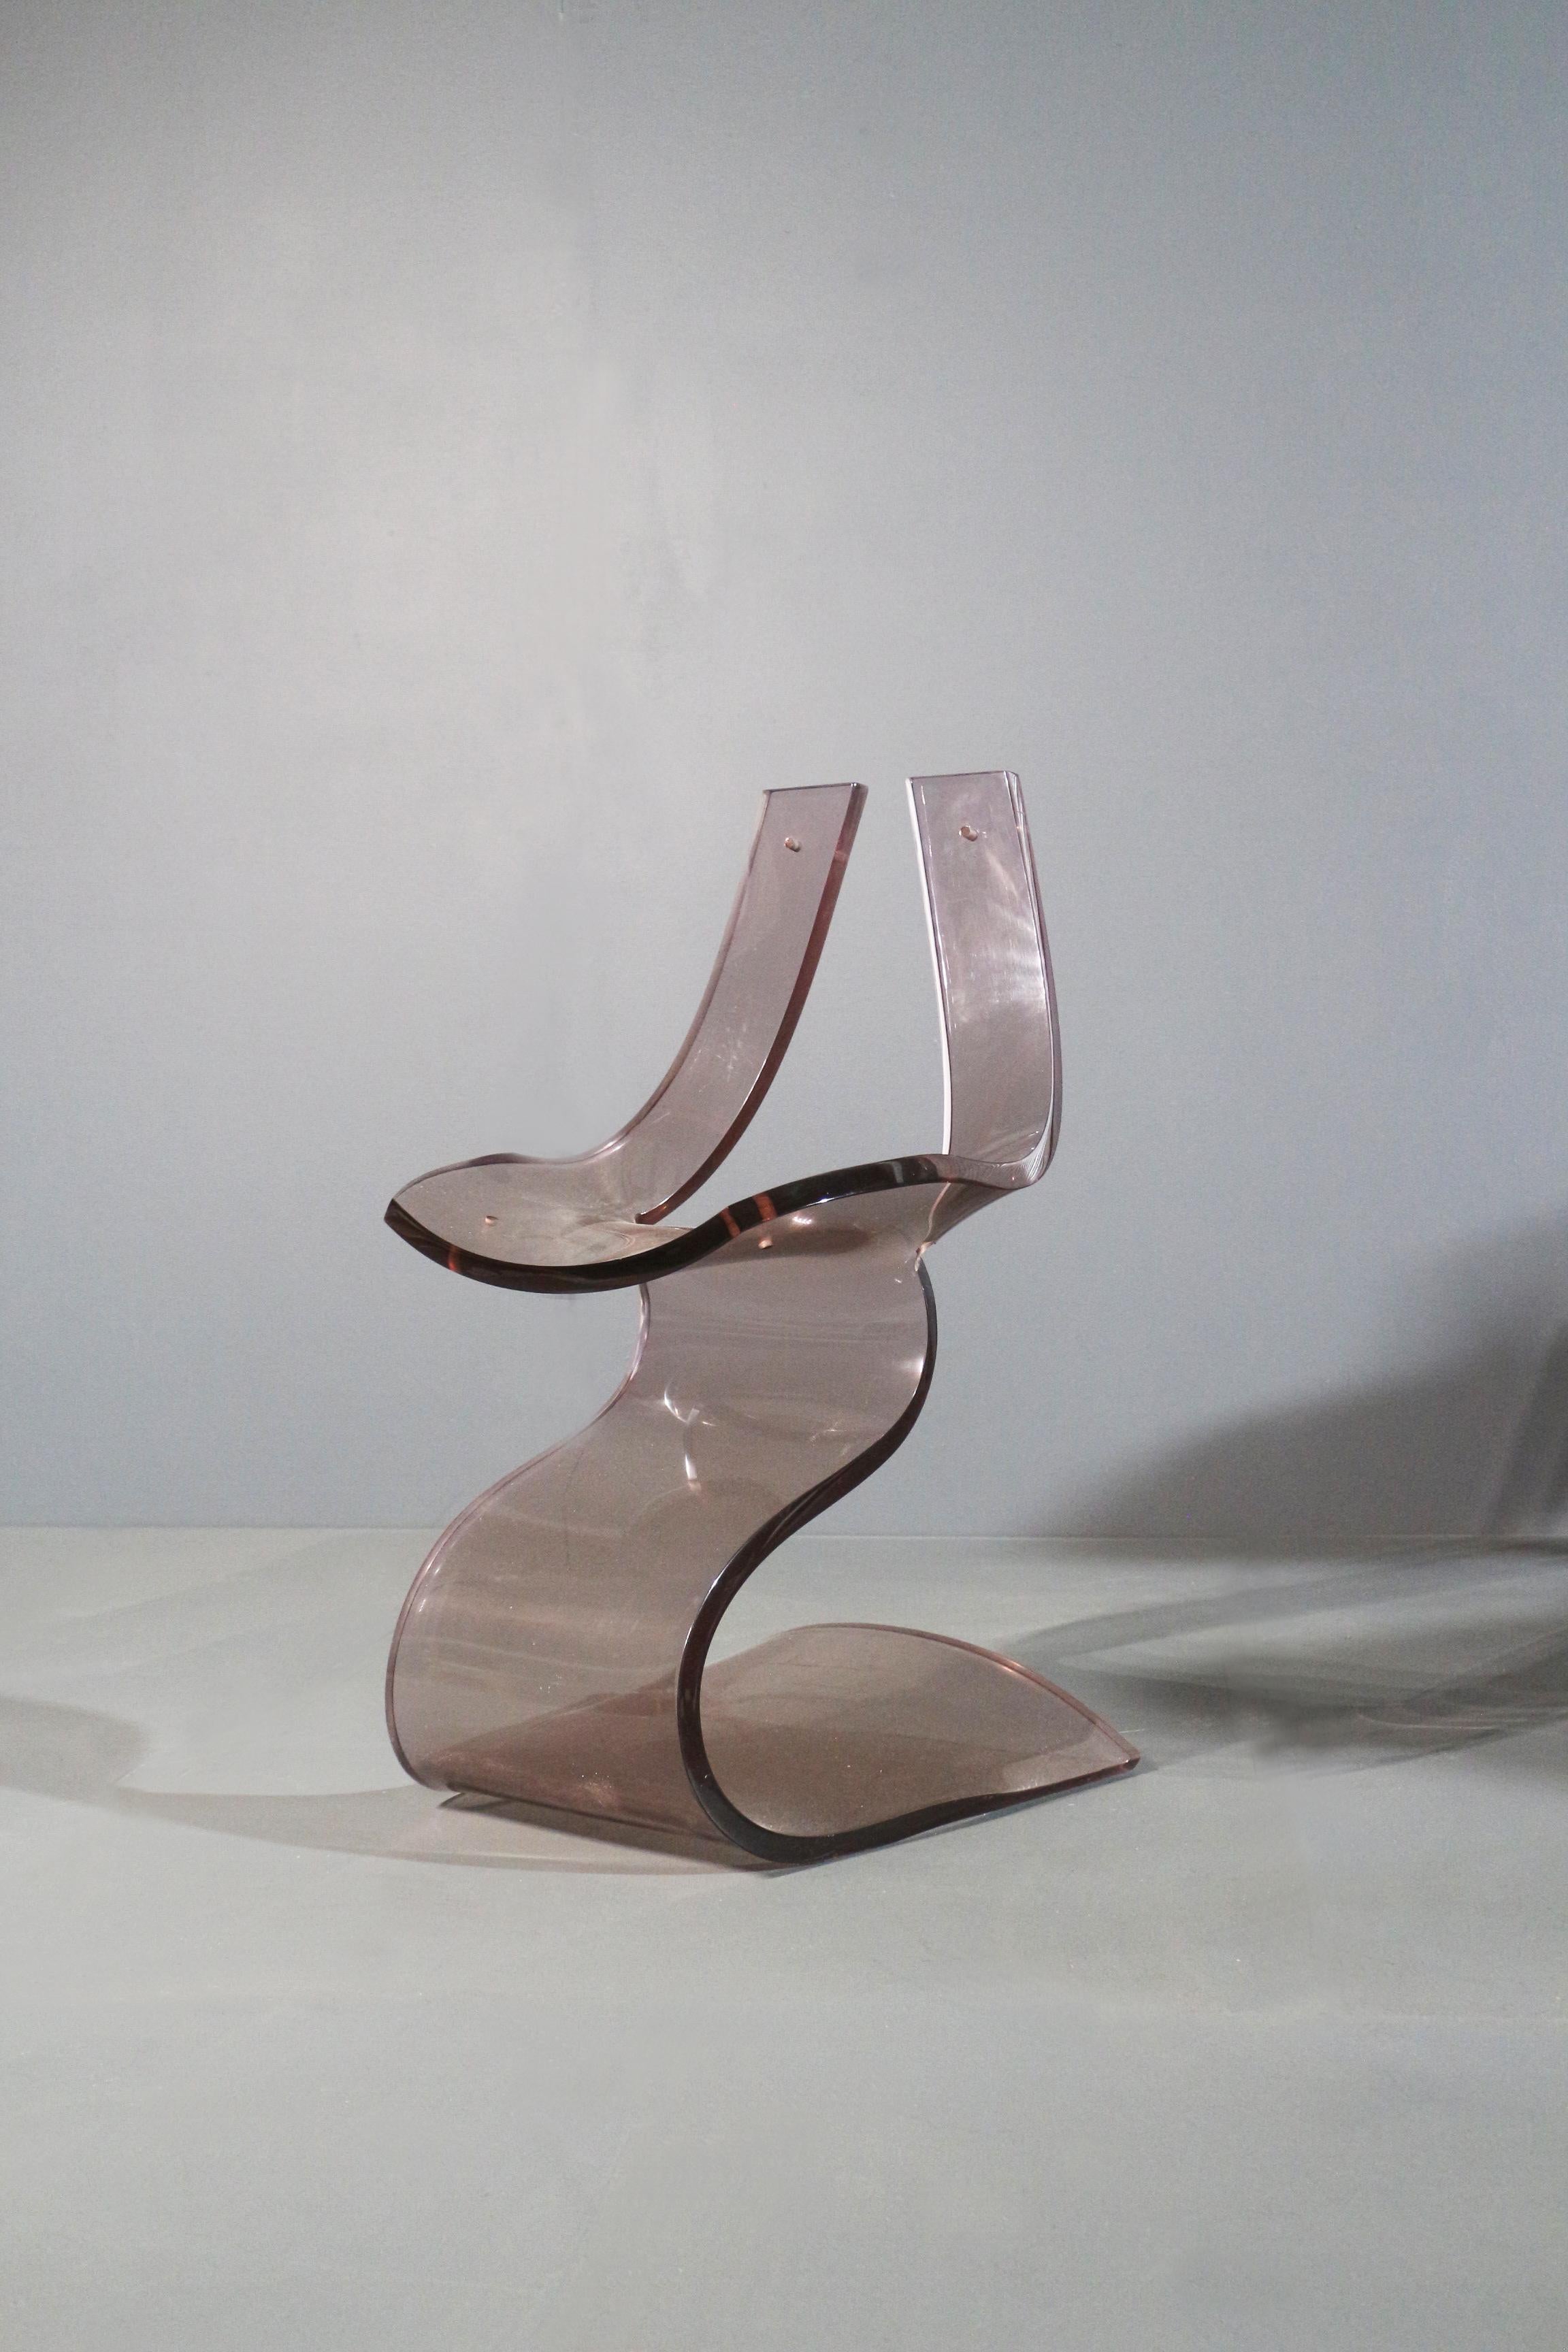 Very rare sculptural chair by Michel Dumas from 1970s. 
Brow plexiglass. In very good conditions.